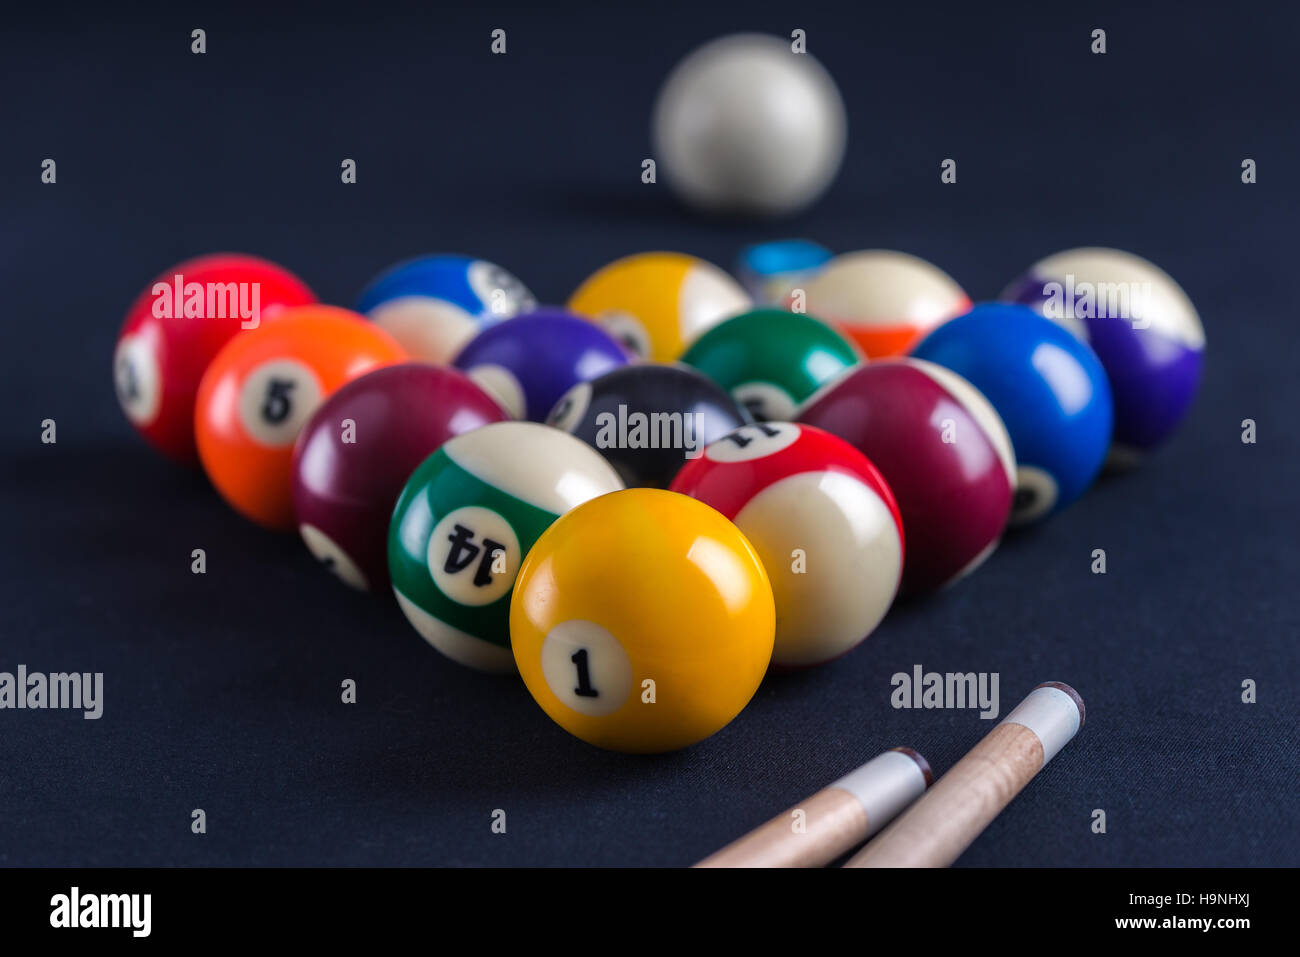 Blue billiard table with all balls and cues. Stock Photo